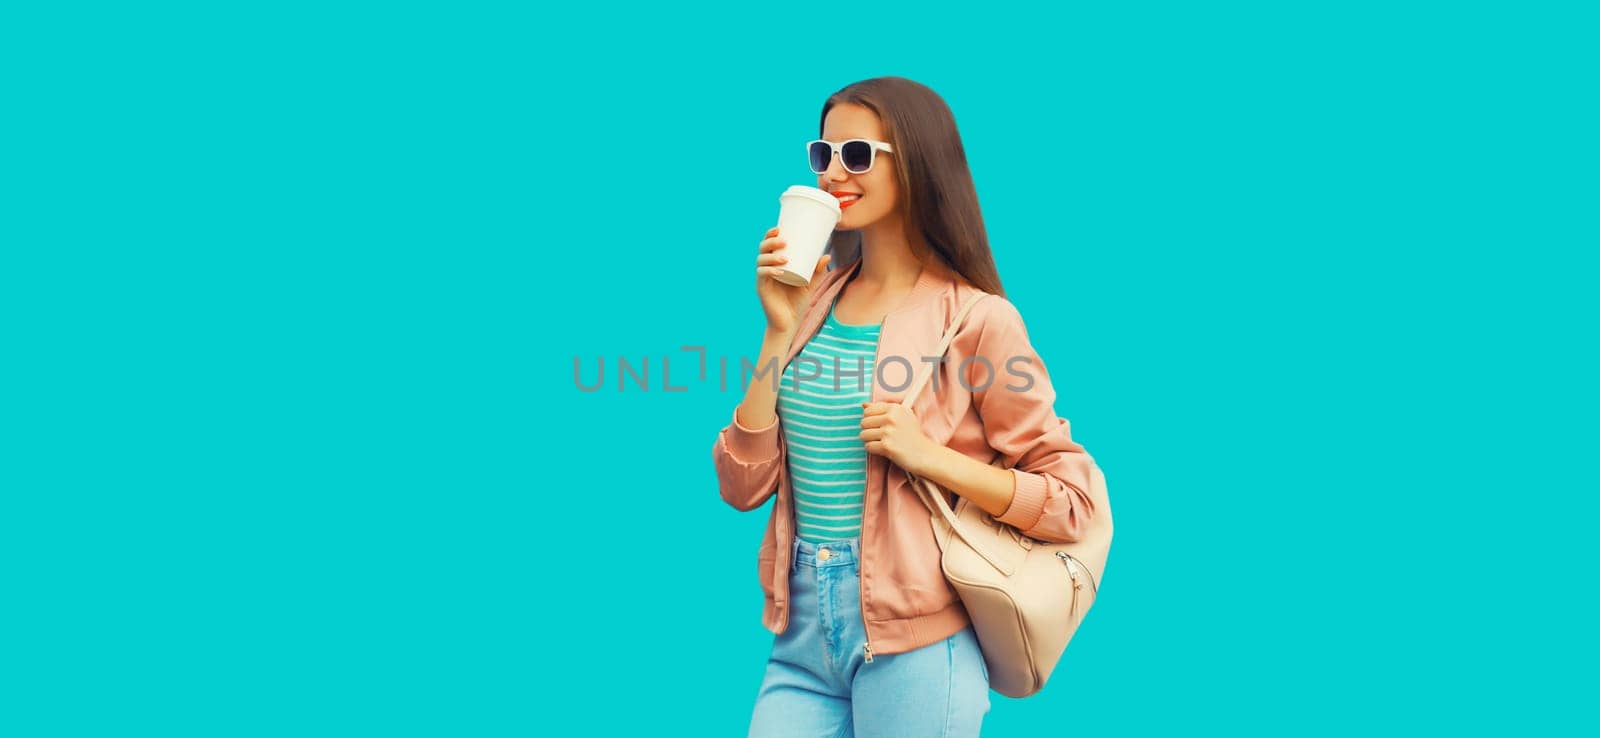 Portrait of smiling young woman drinking coffee wearing backpack on blue background